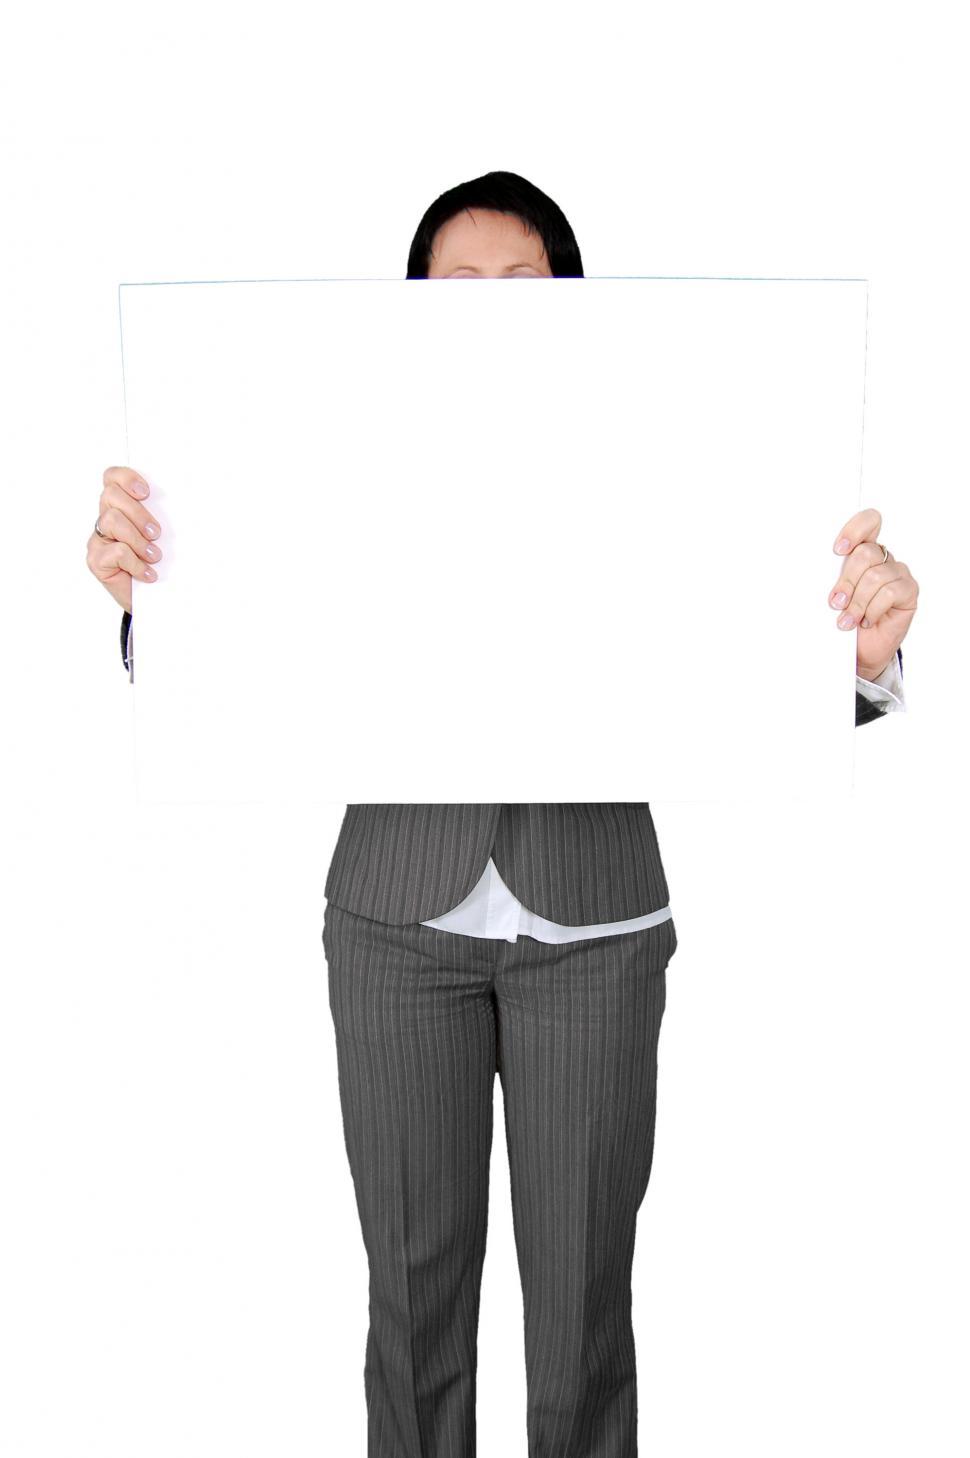 Free Image of Woman in a Suit Holding Up a Sign 